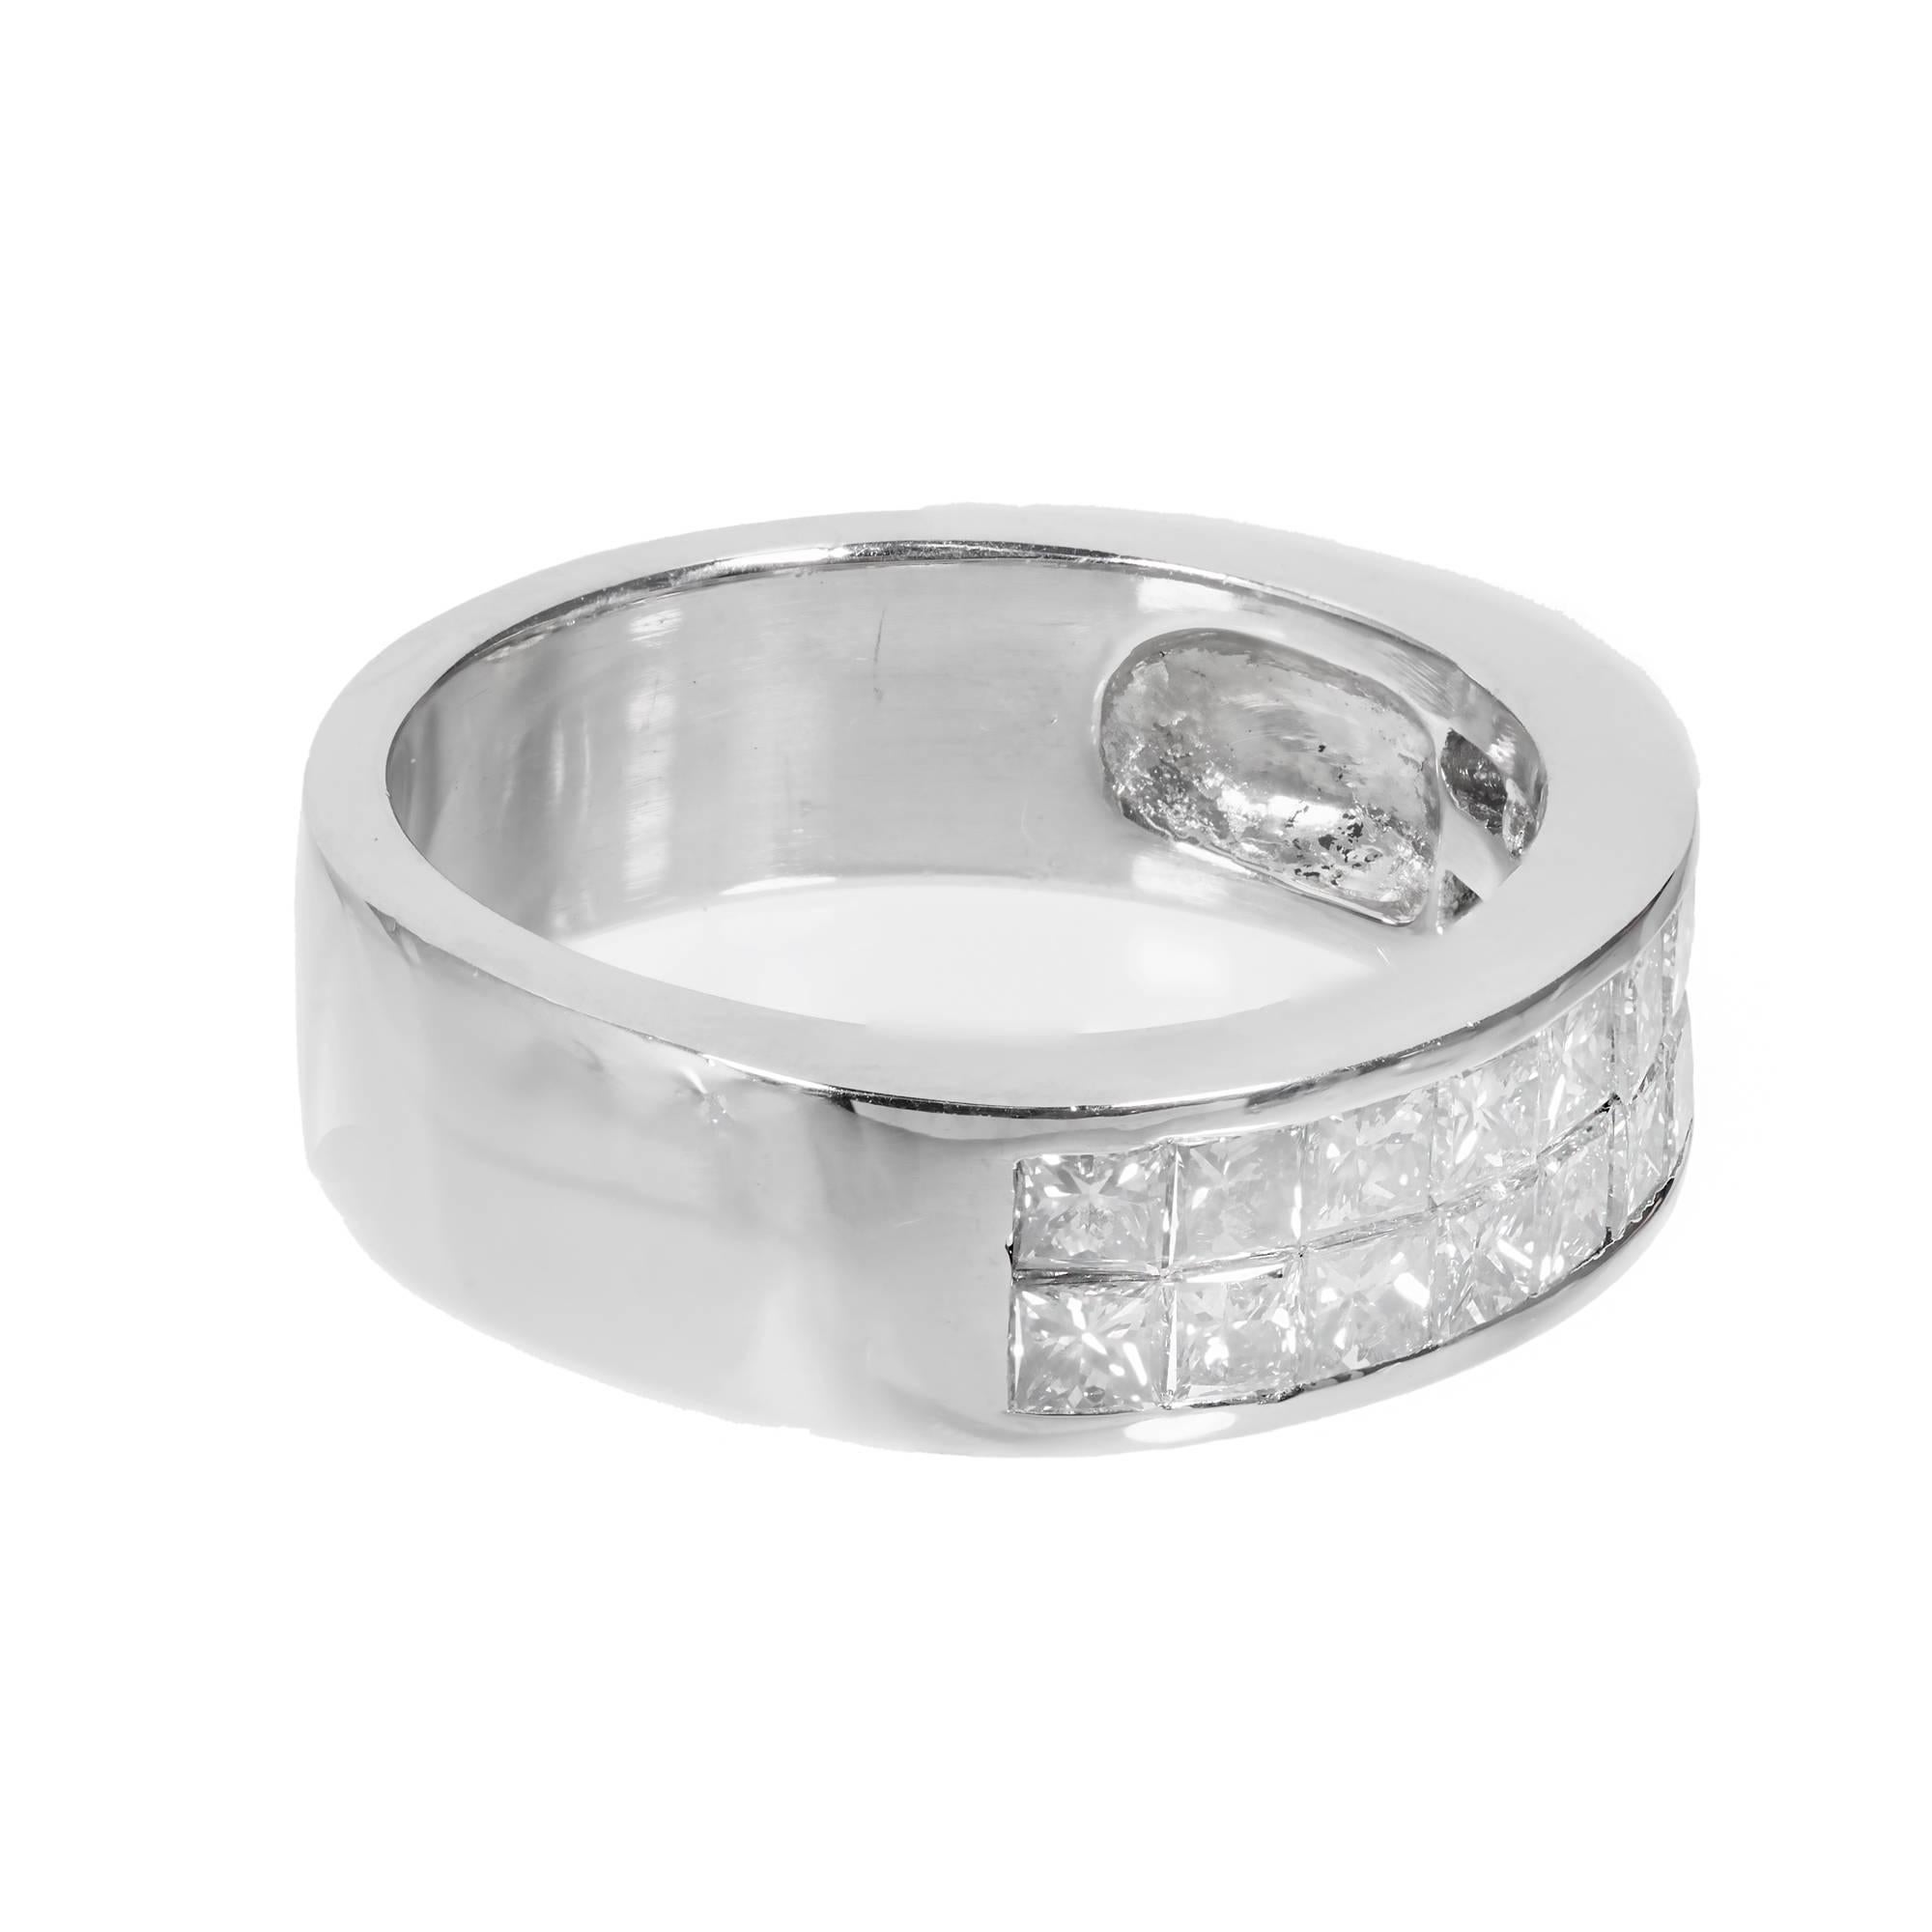 Diamond Solid platinum two row 6mm wide wedding band with 1.50 carats of princess cut diamonds. 

20 princess cut diamonds F VS approximately 1.50 carats 
Size 7 ¾ and sizable
Platinum
Tested: platinum
Stamped: platinum
12.3 grams
6.44 mm wide at